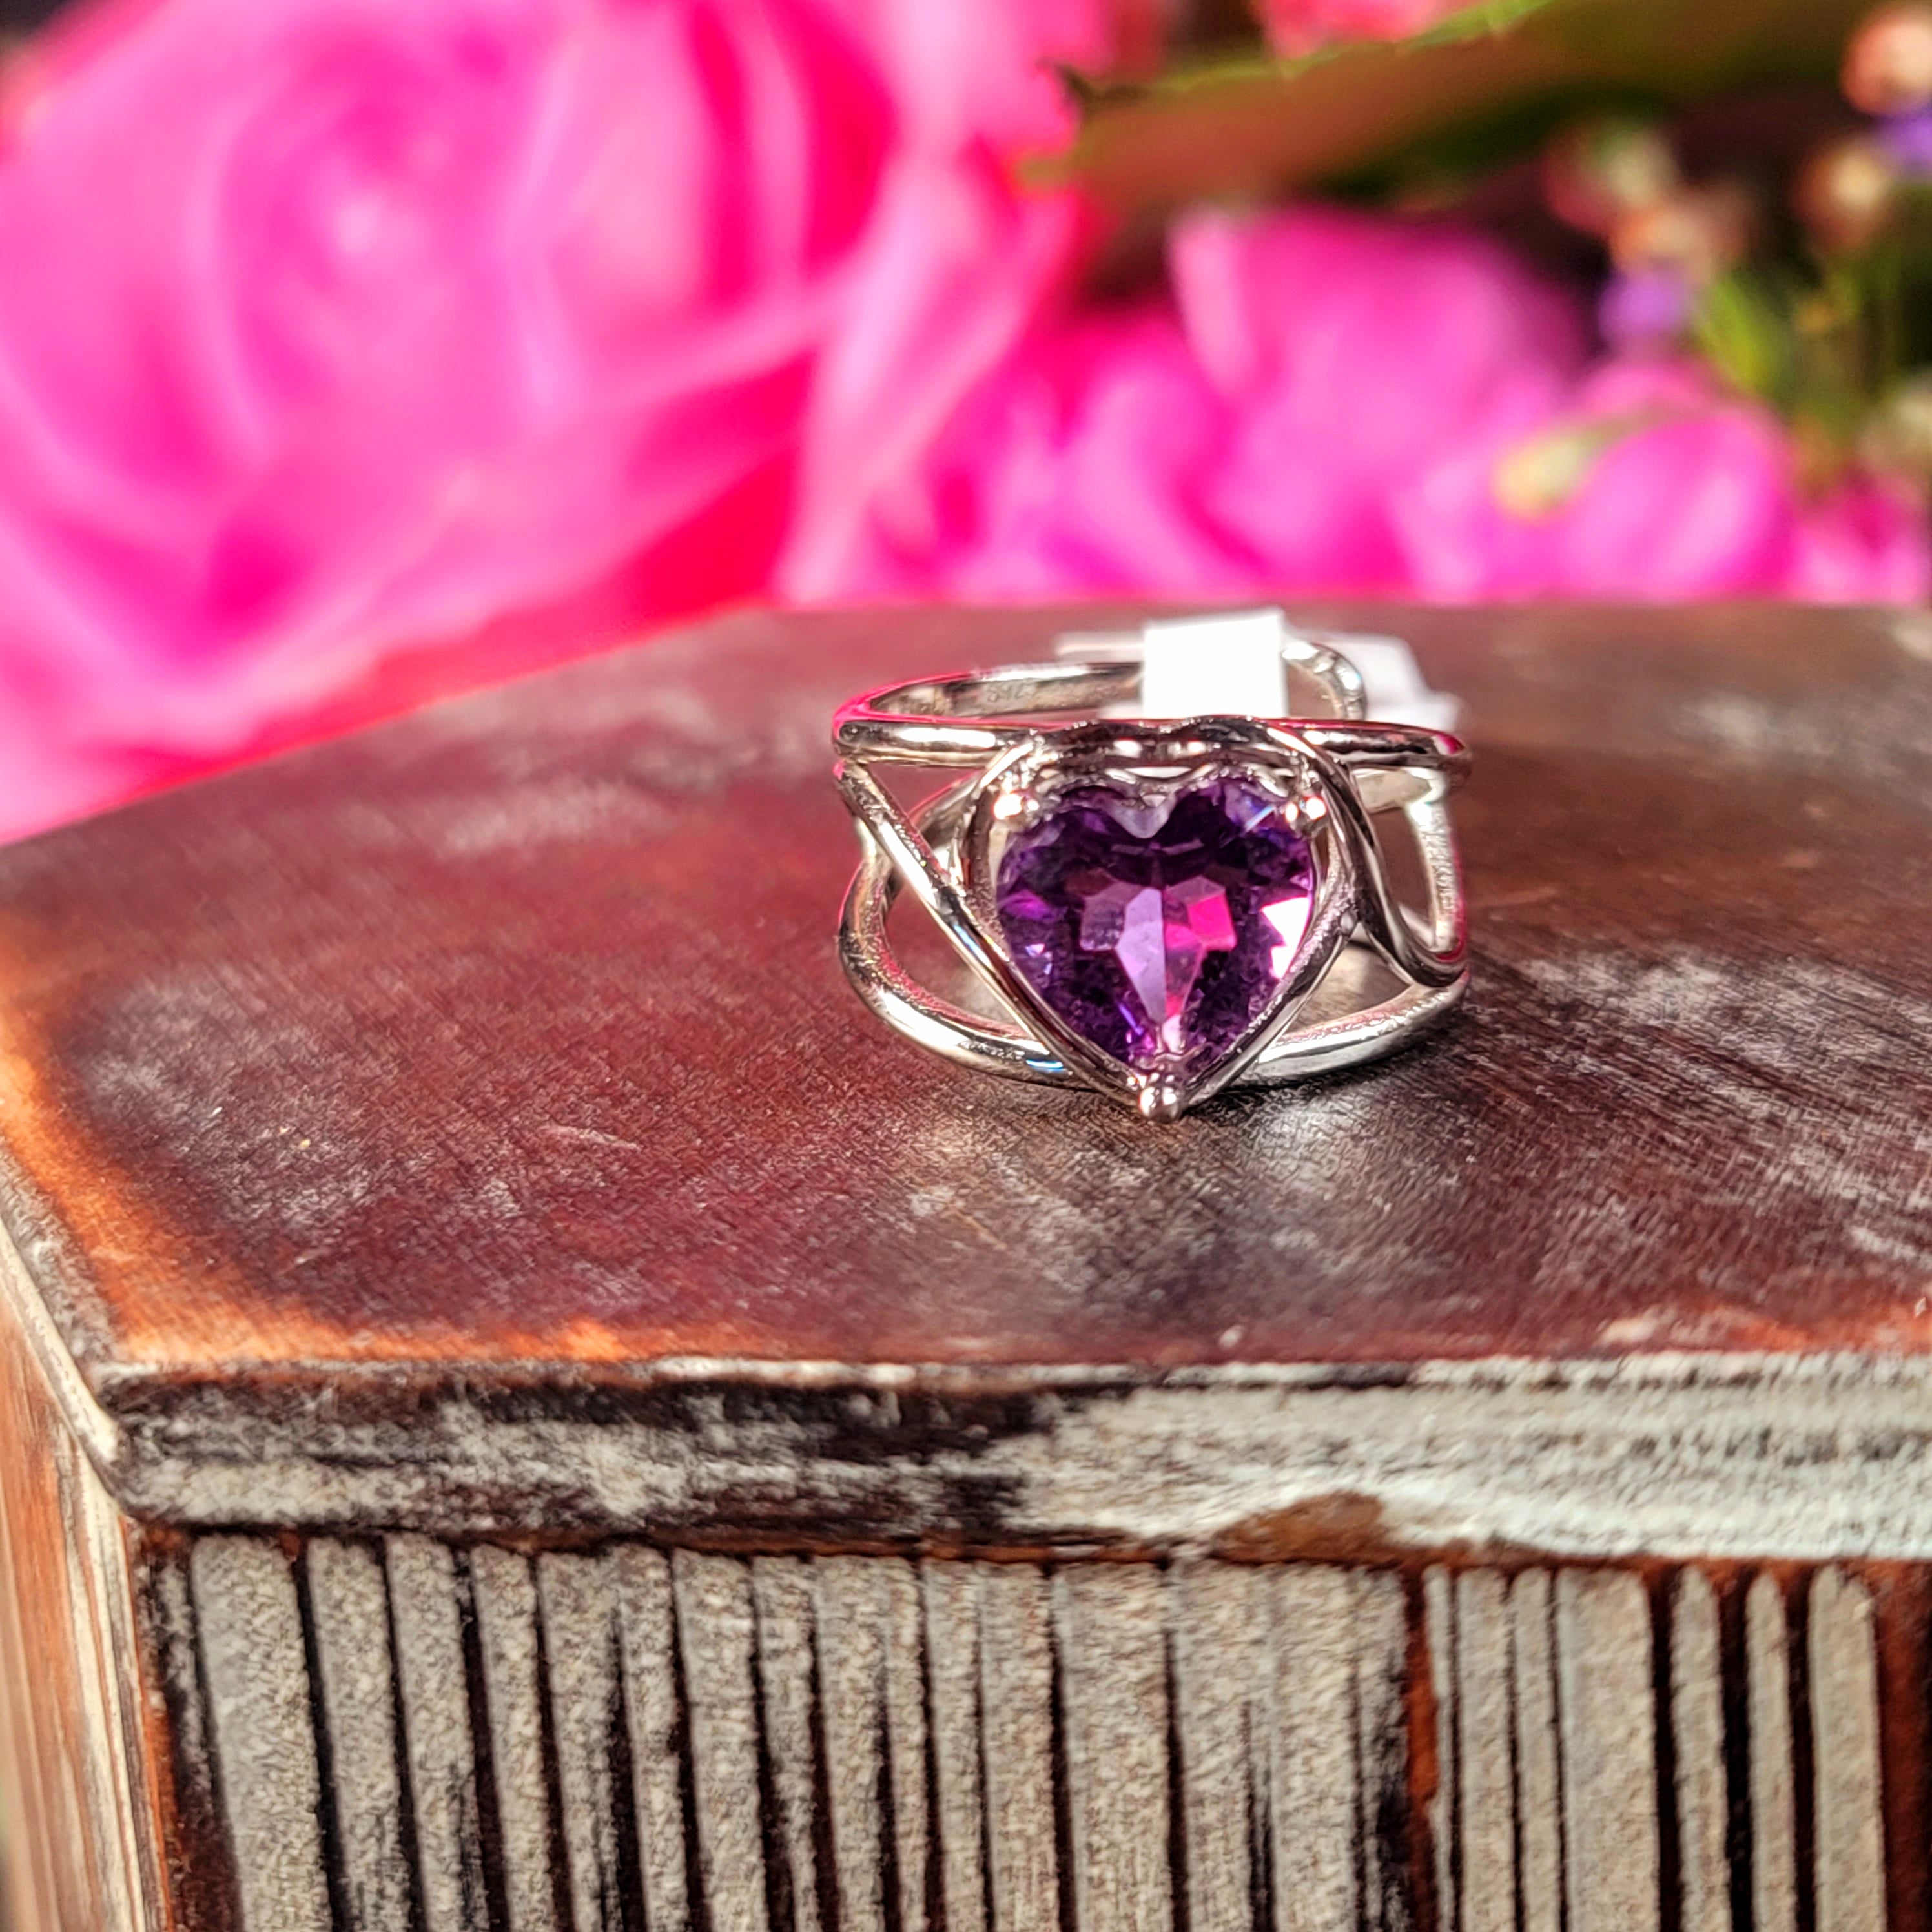 Amethyst Heart Finger Cuff Adjustable Ring .925 Silver for Enhancing your Intuitive Gifts